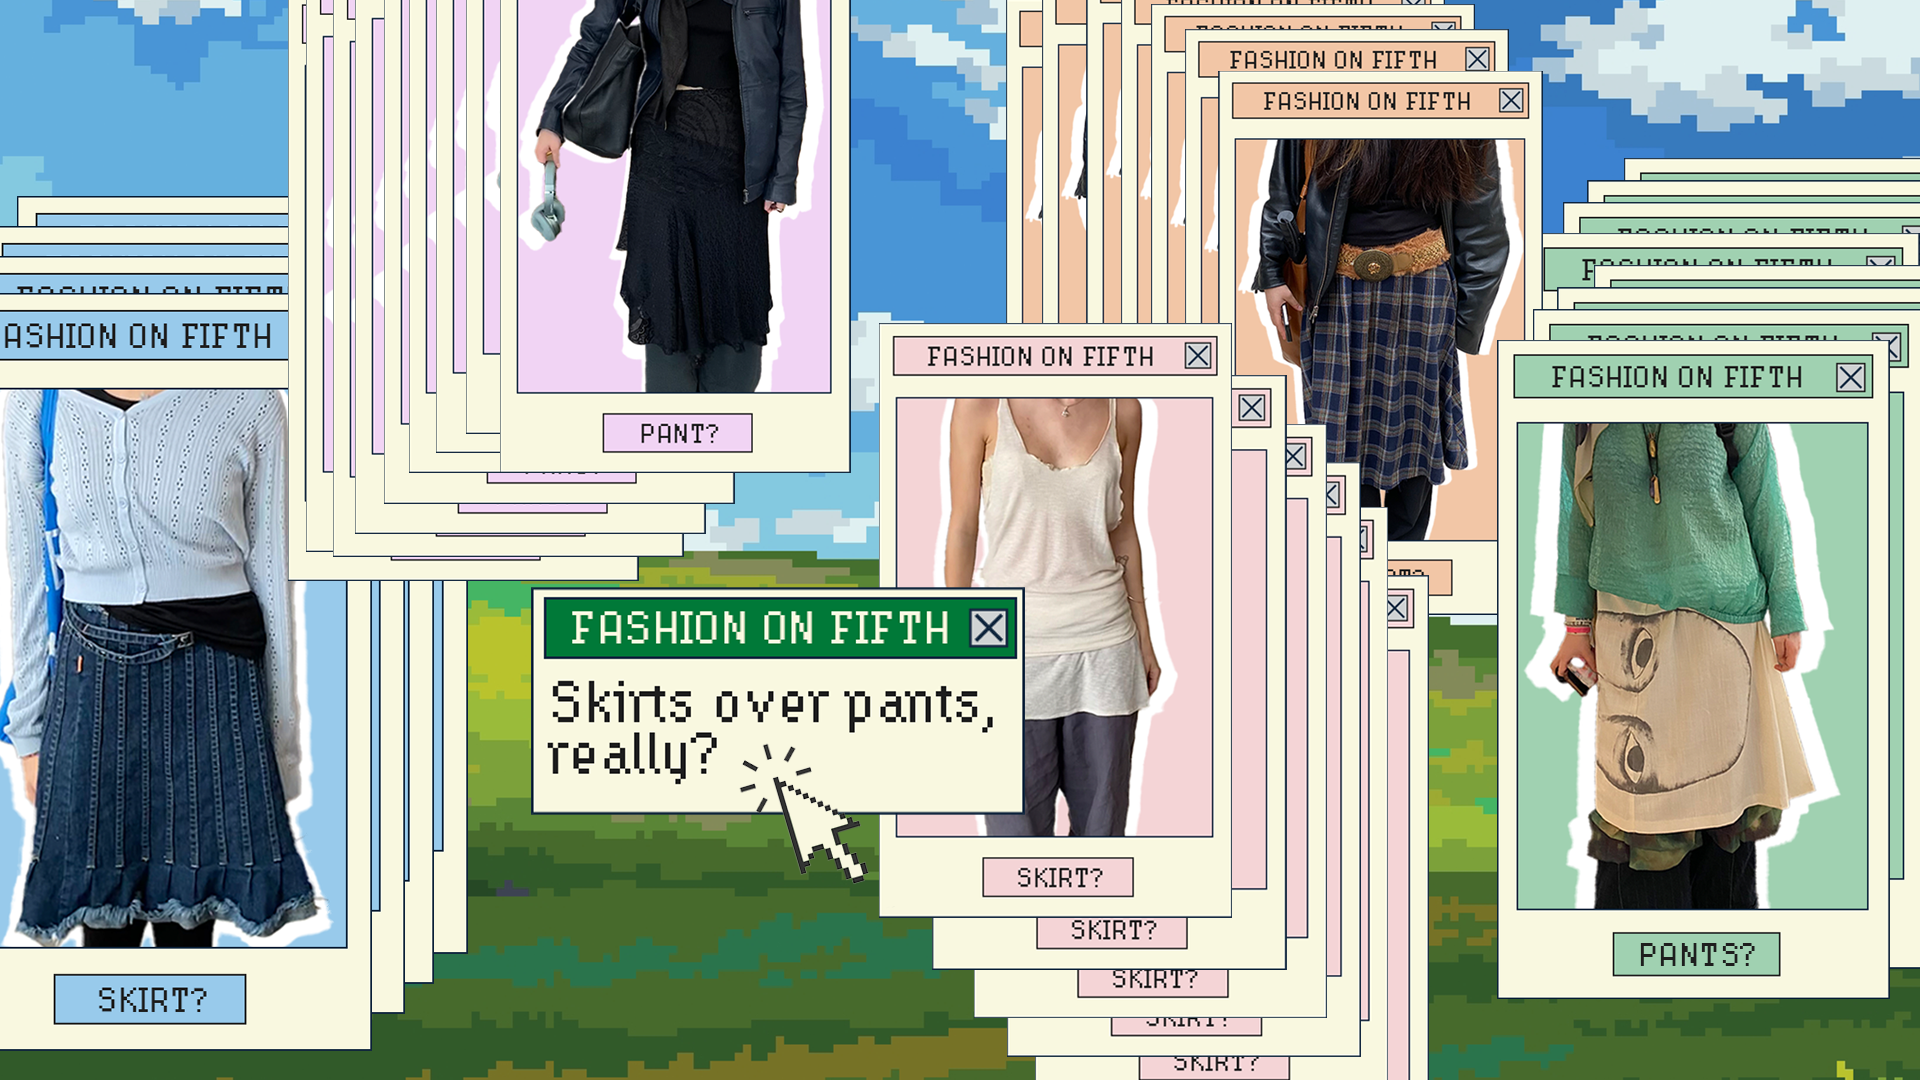 An image with 5 outfits in different internet style tabs over a background of a field with a blue sky.